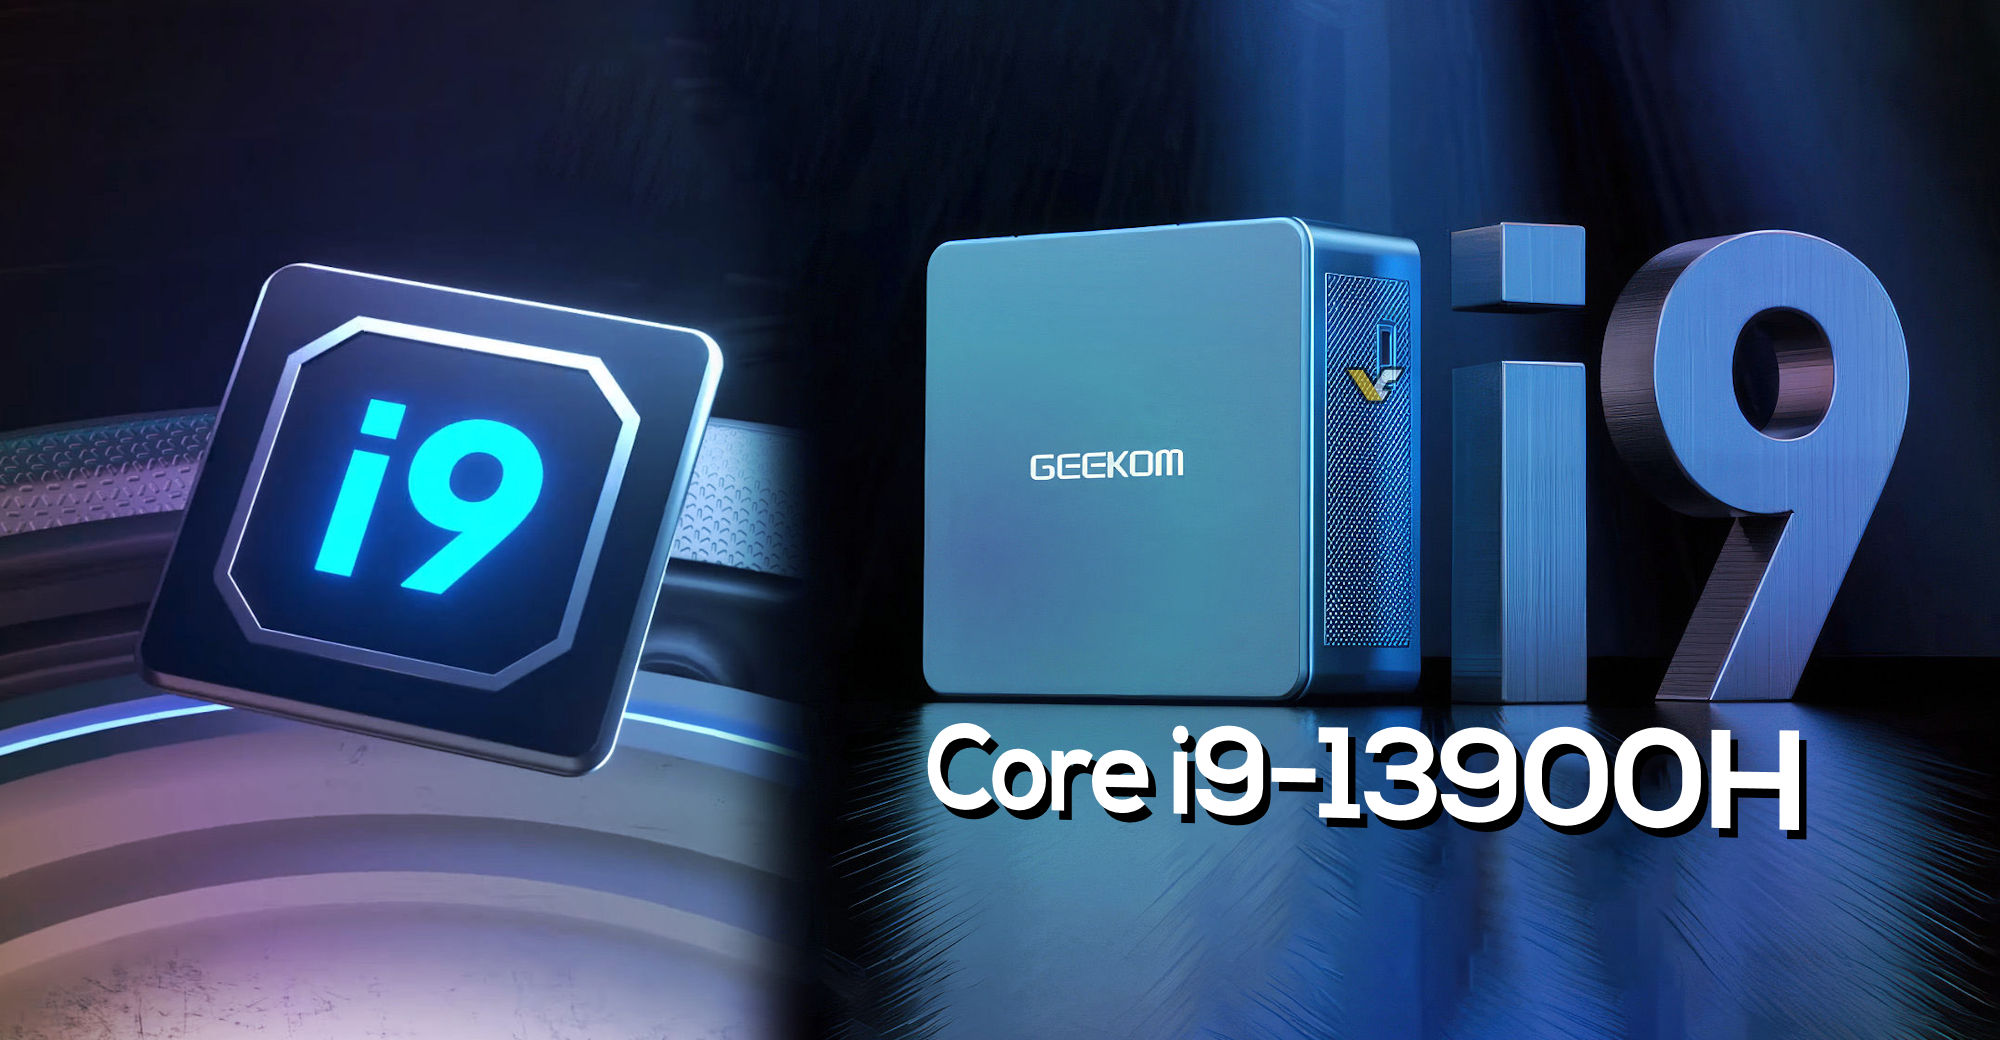 Geekom's Mini IT13 delivers a mighty Core i9 in a tiny 4x4 form